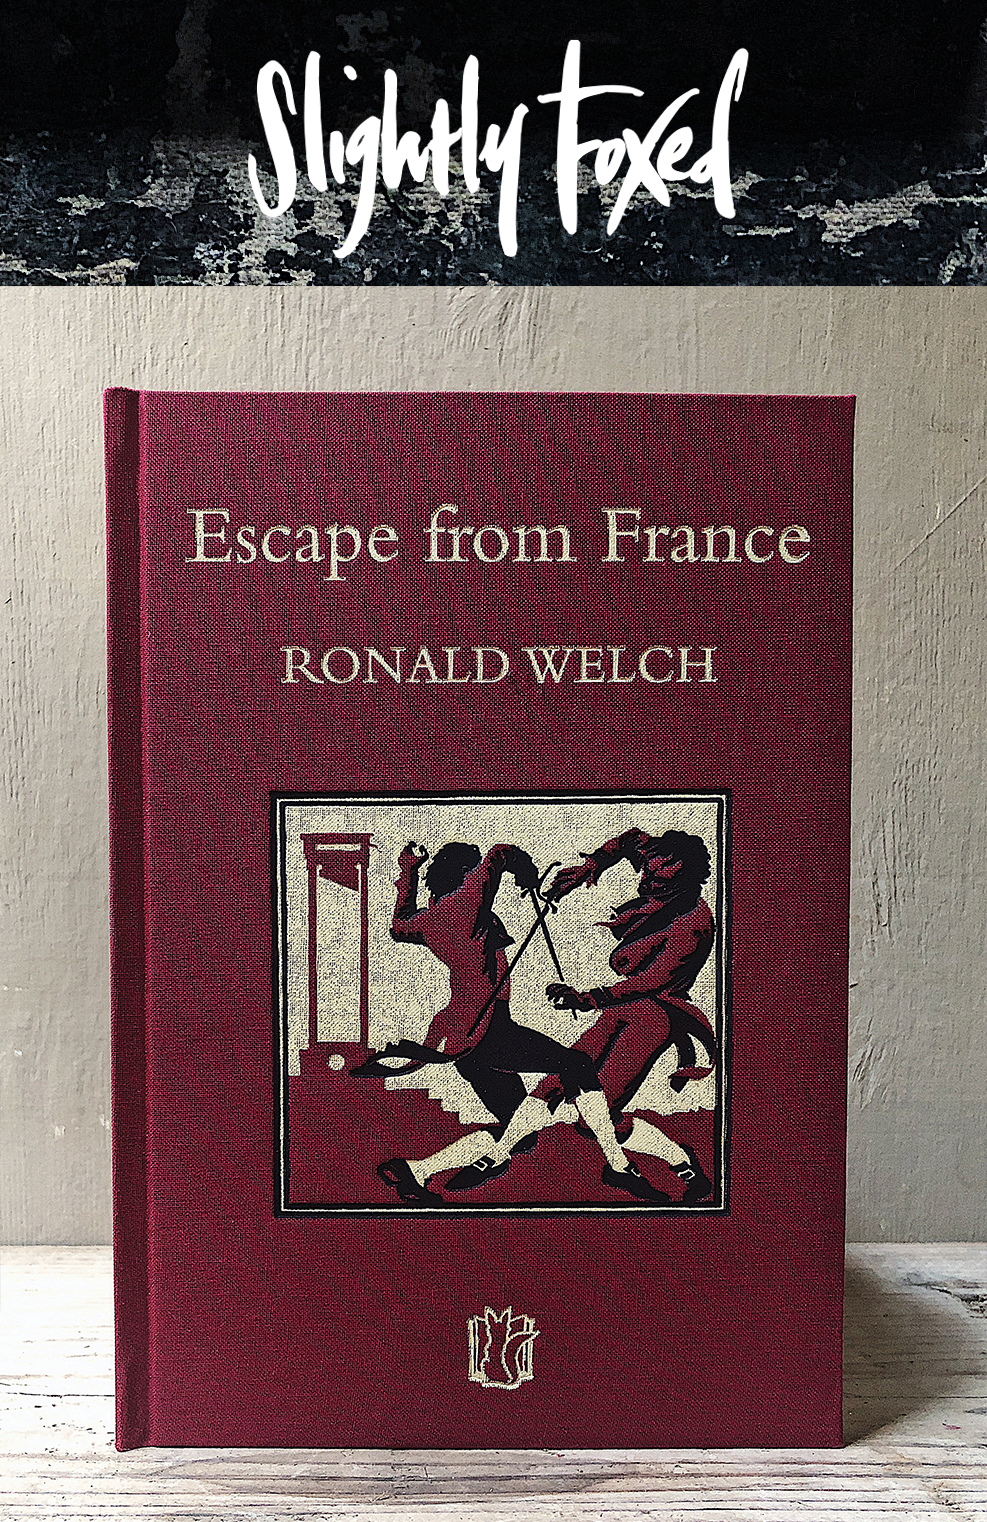 Ronald Welch, Escape from France | From the Slightly Foxed Cubs bookshelves